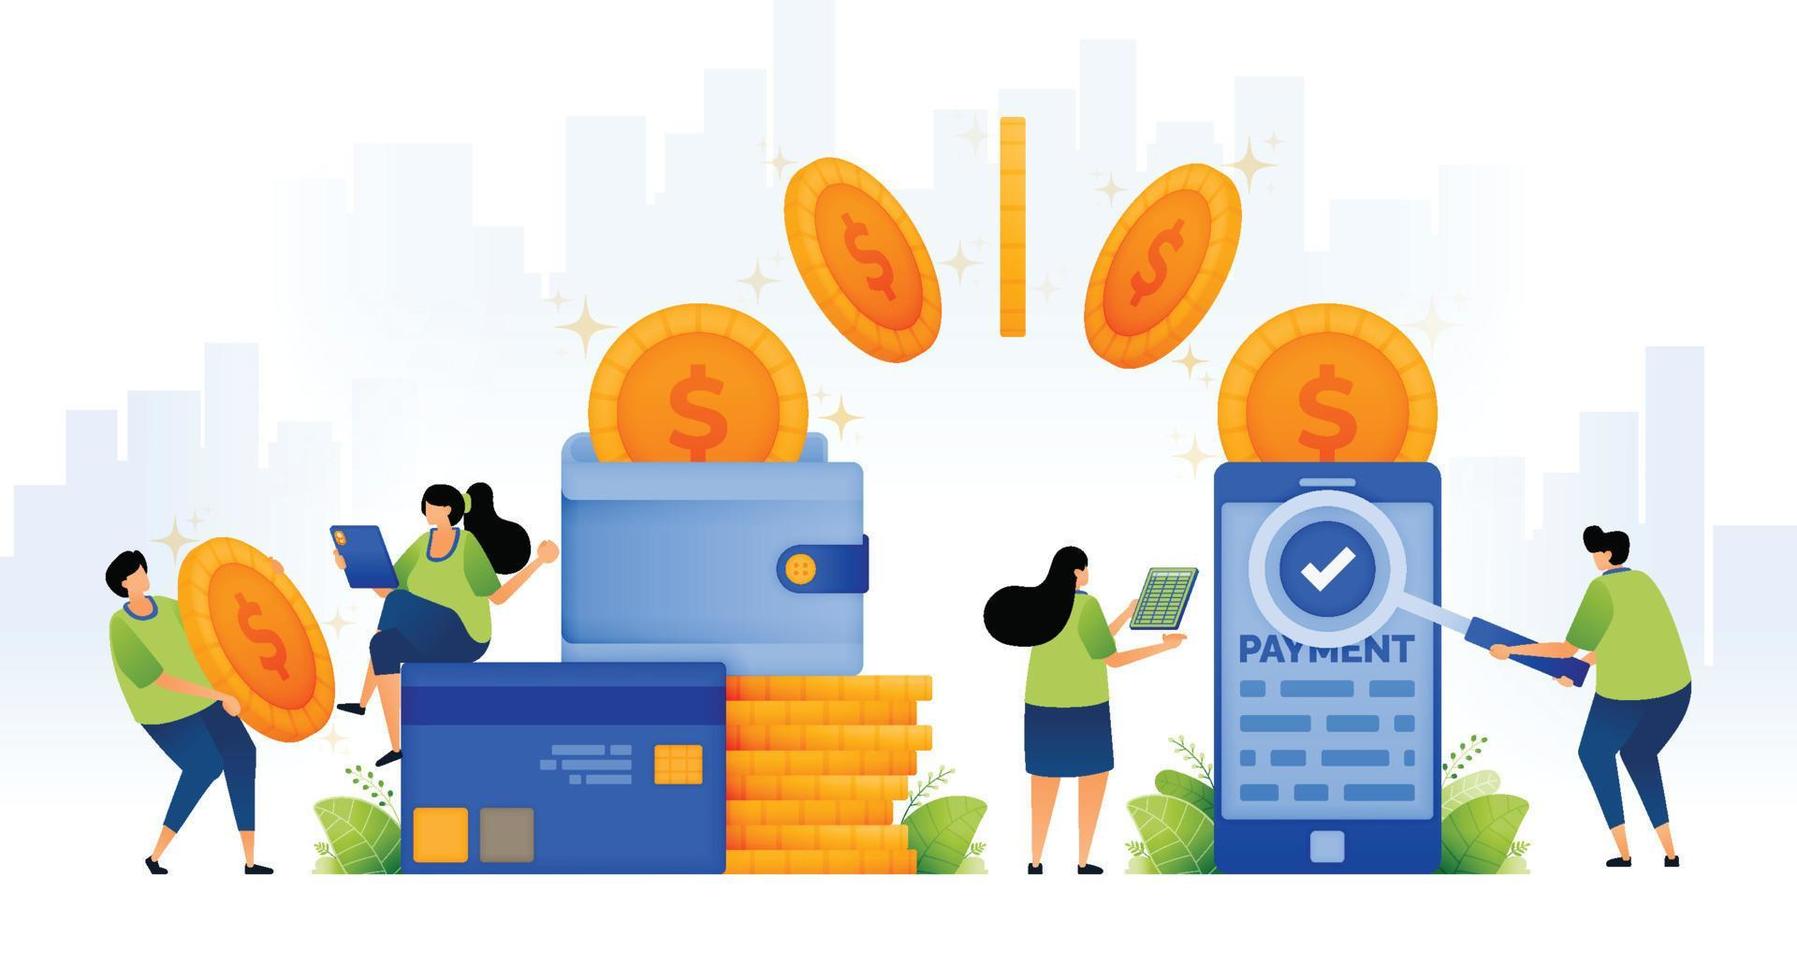 design illustration of digital public financial system or cashless. people move coins from wallets to smartphones. payment and investments. can be used for web, website, posters, apps, brochures vector